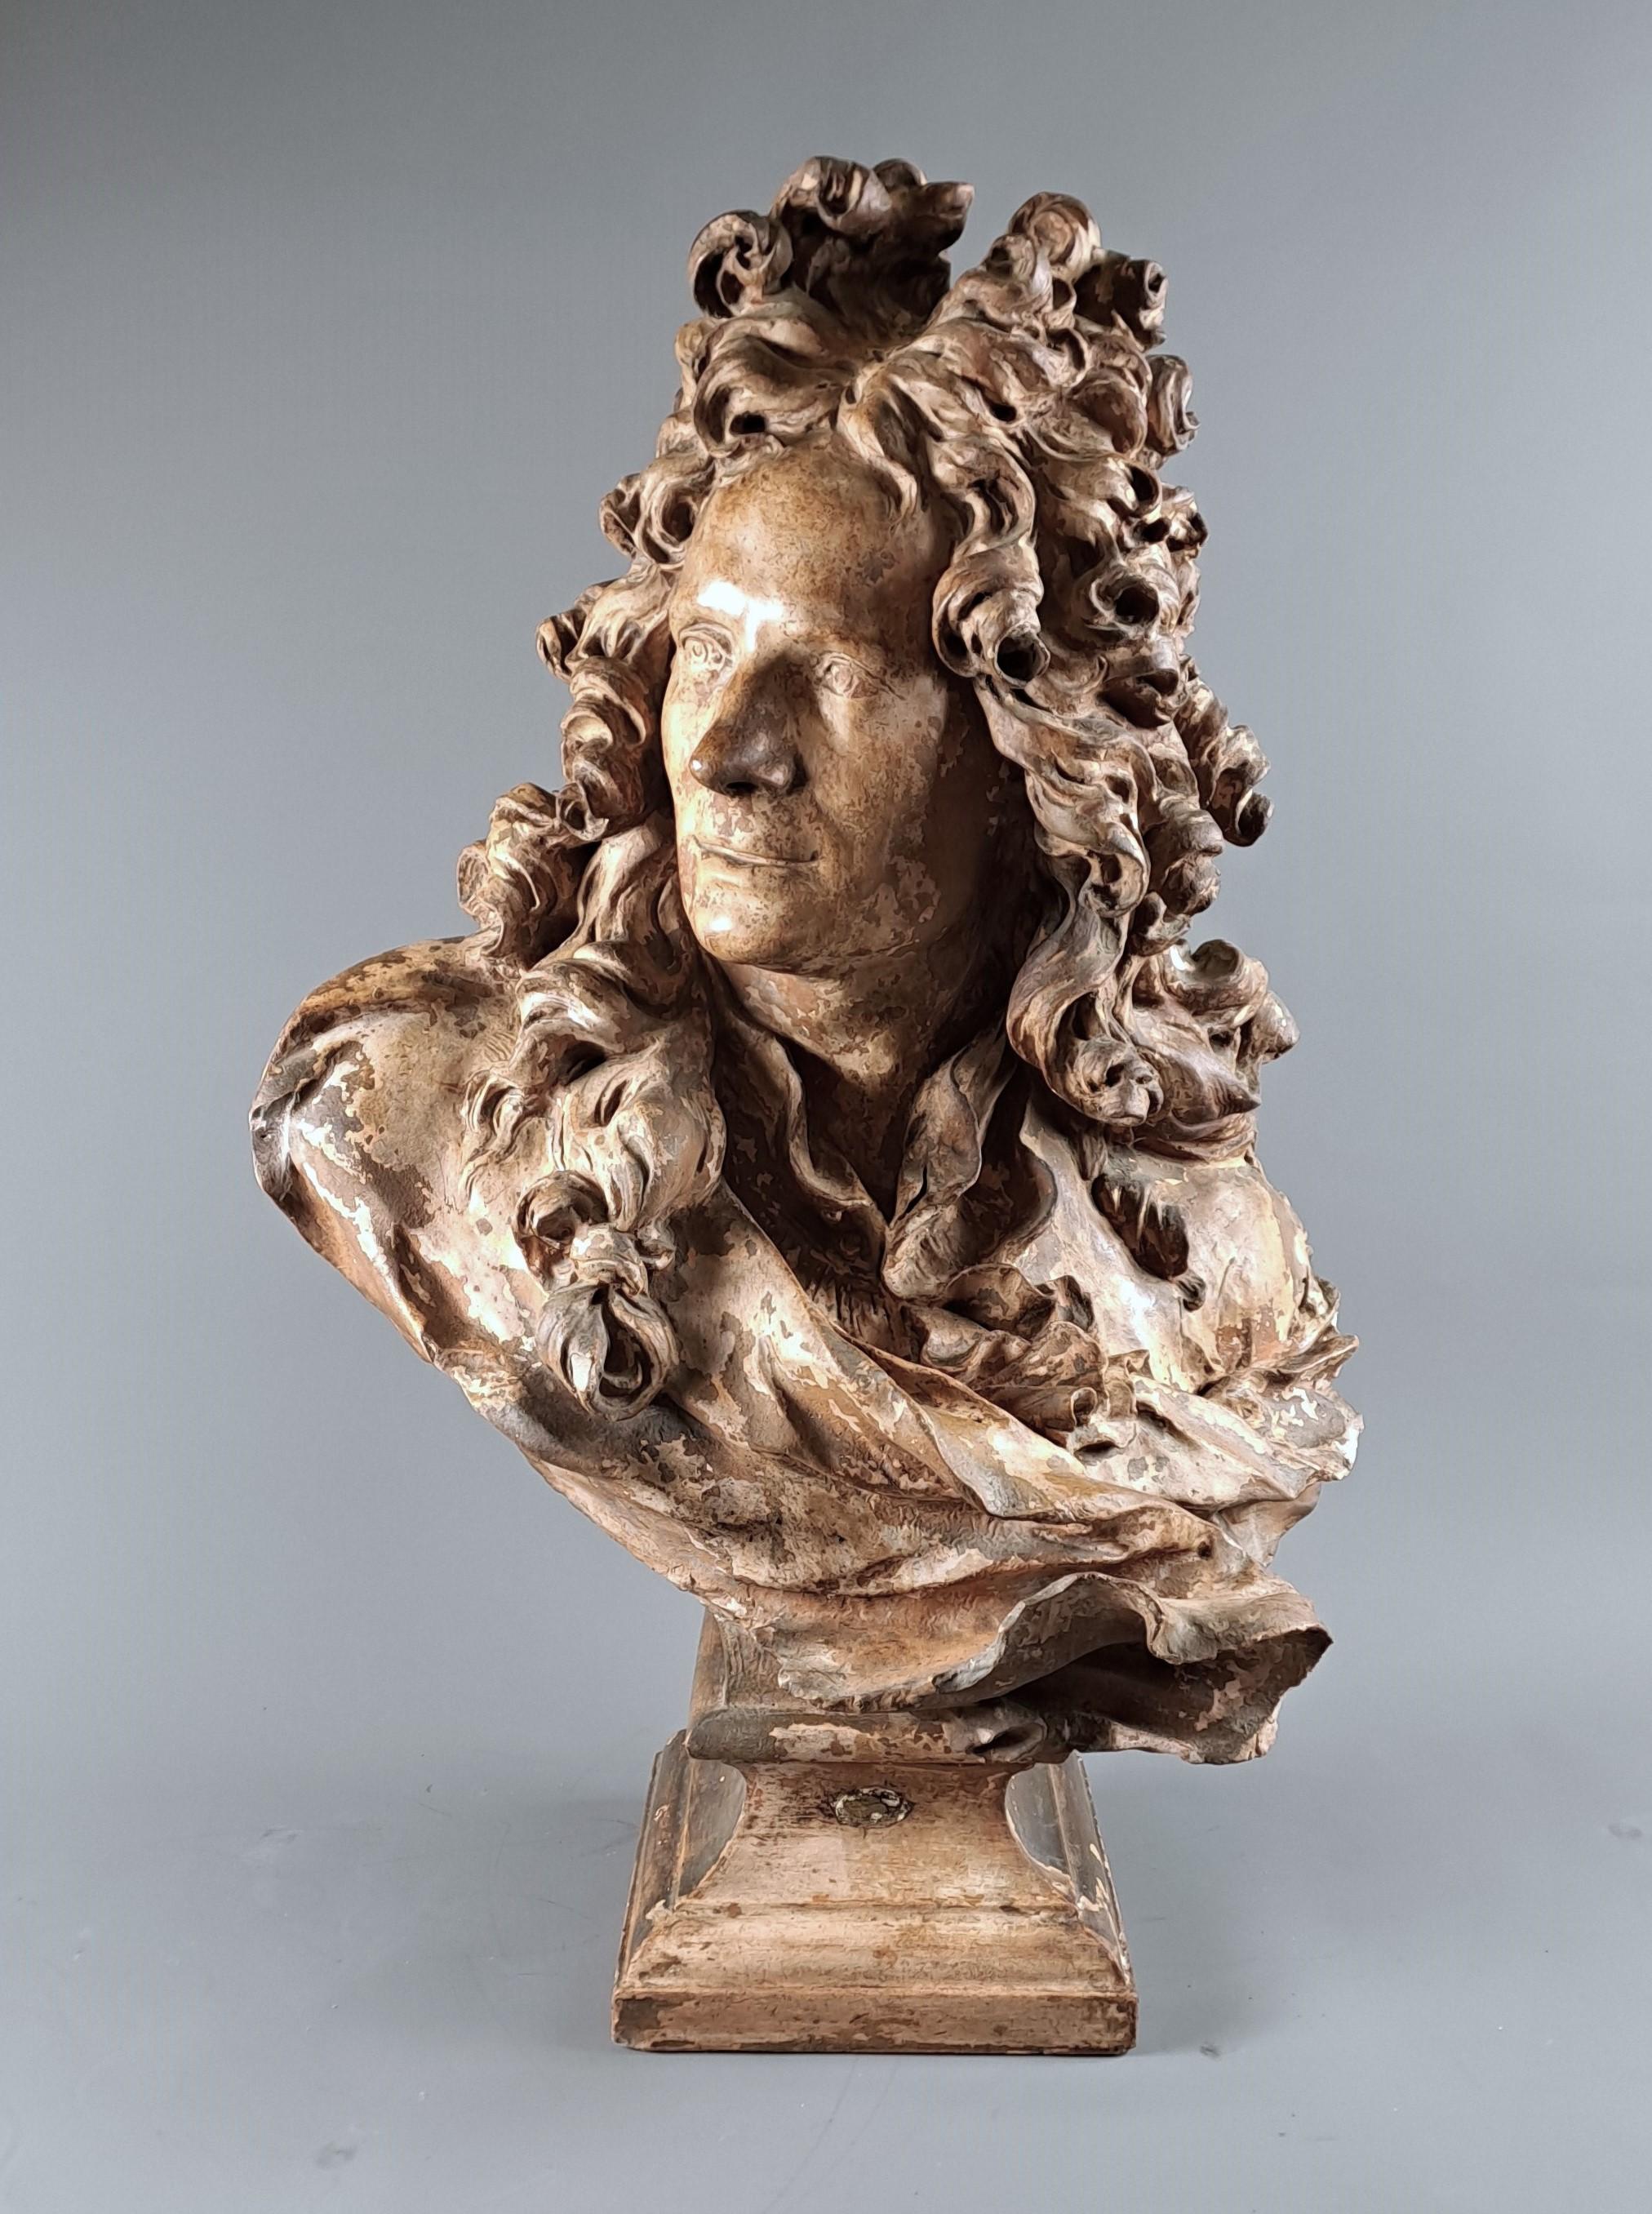 Magnificent terracotta bust representing the sculptor Corneille Van Cleve (1645-1732) after a work by Jean-Jacques Caffieri (Paris, 04/29/1725 - Paris, 06/21/1792).

Old work from the 19th century.

Ideal for an 18th century decor.

Very good